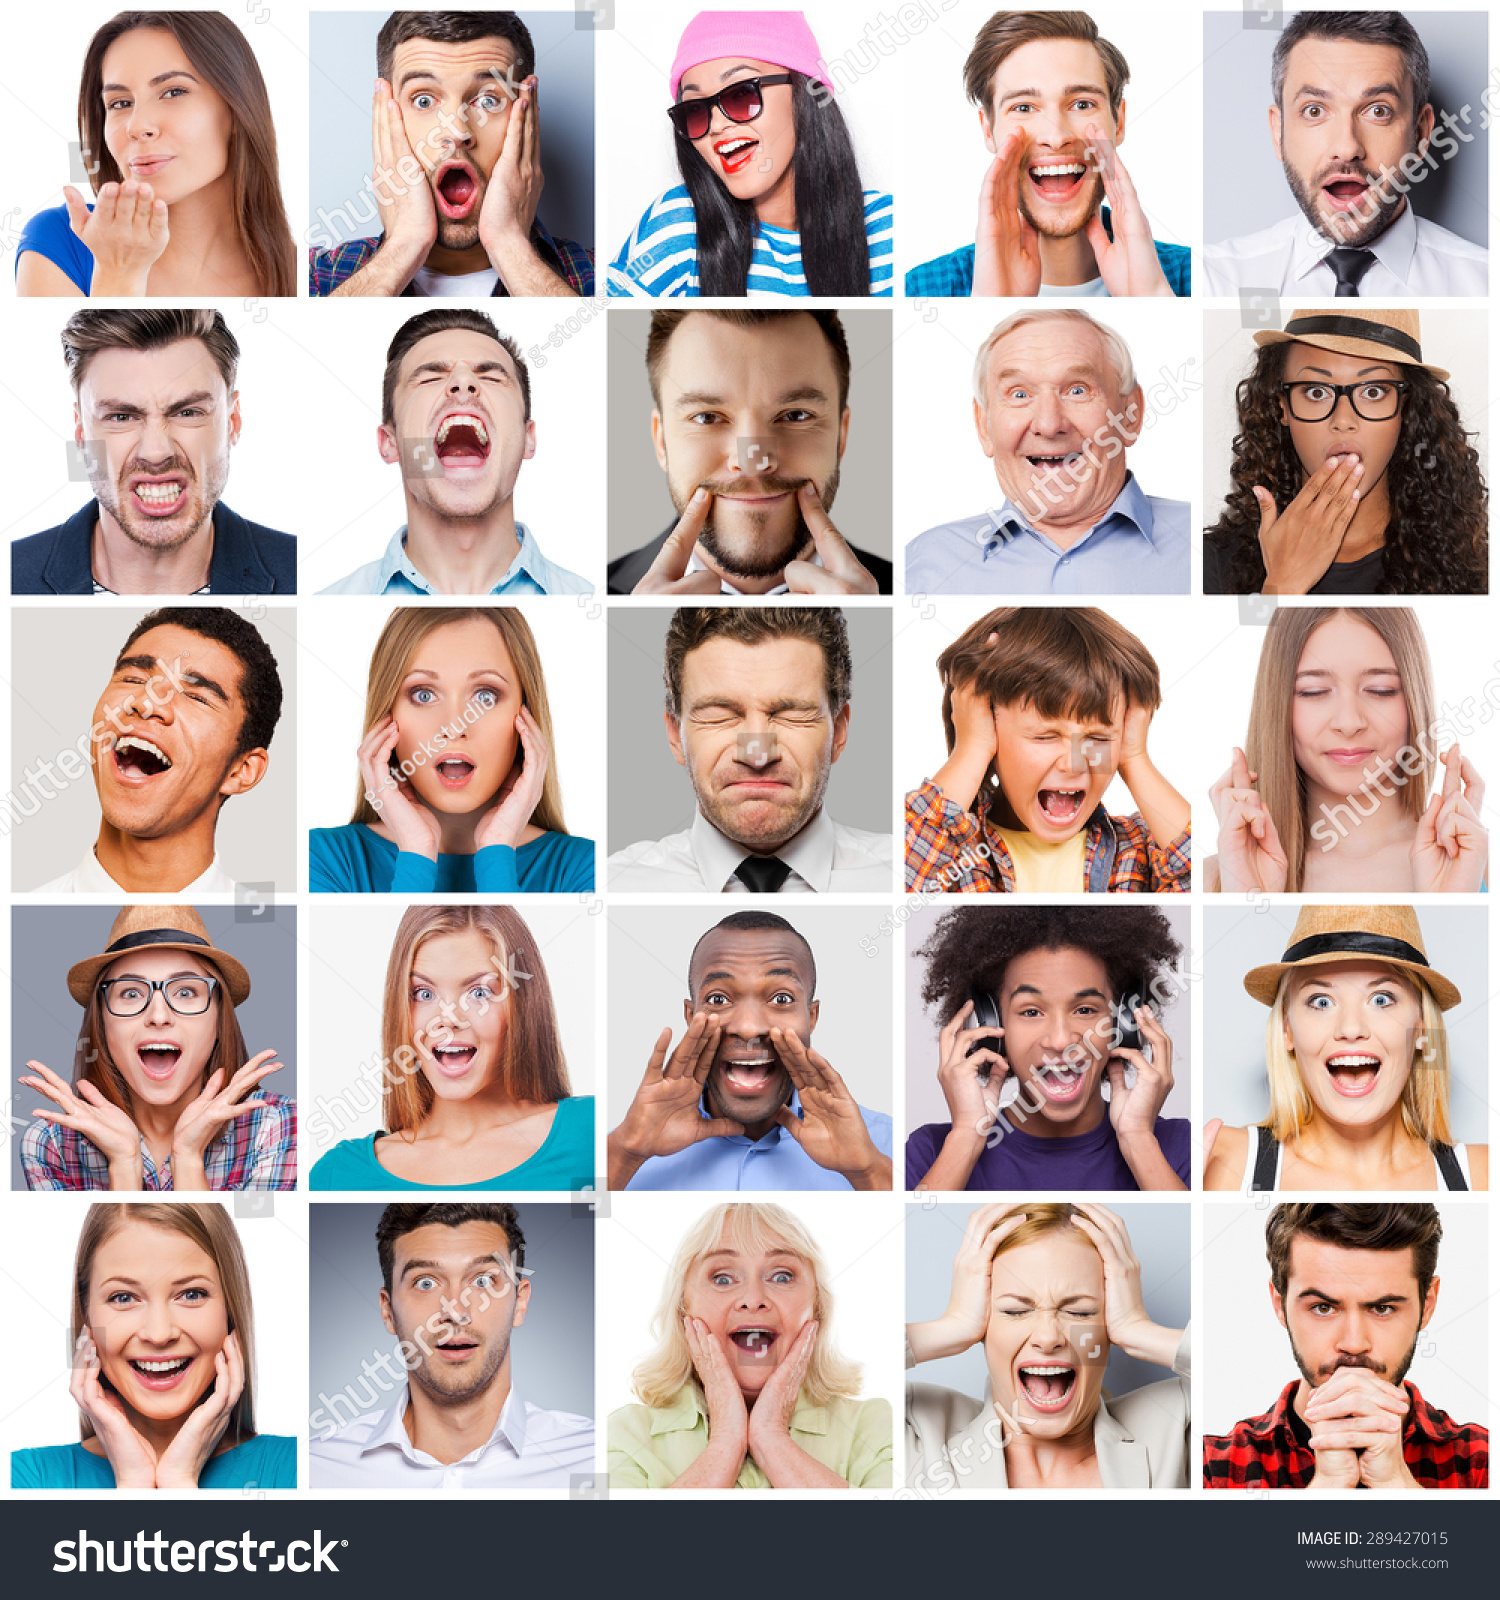 Diverse people with different emotions. Collage of diverse multi-ethnic and mixed age range people expressing different emotions  #289427015